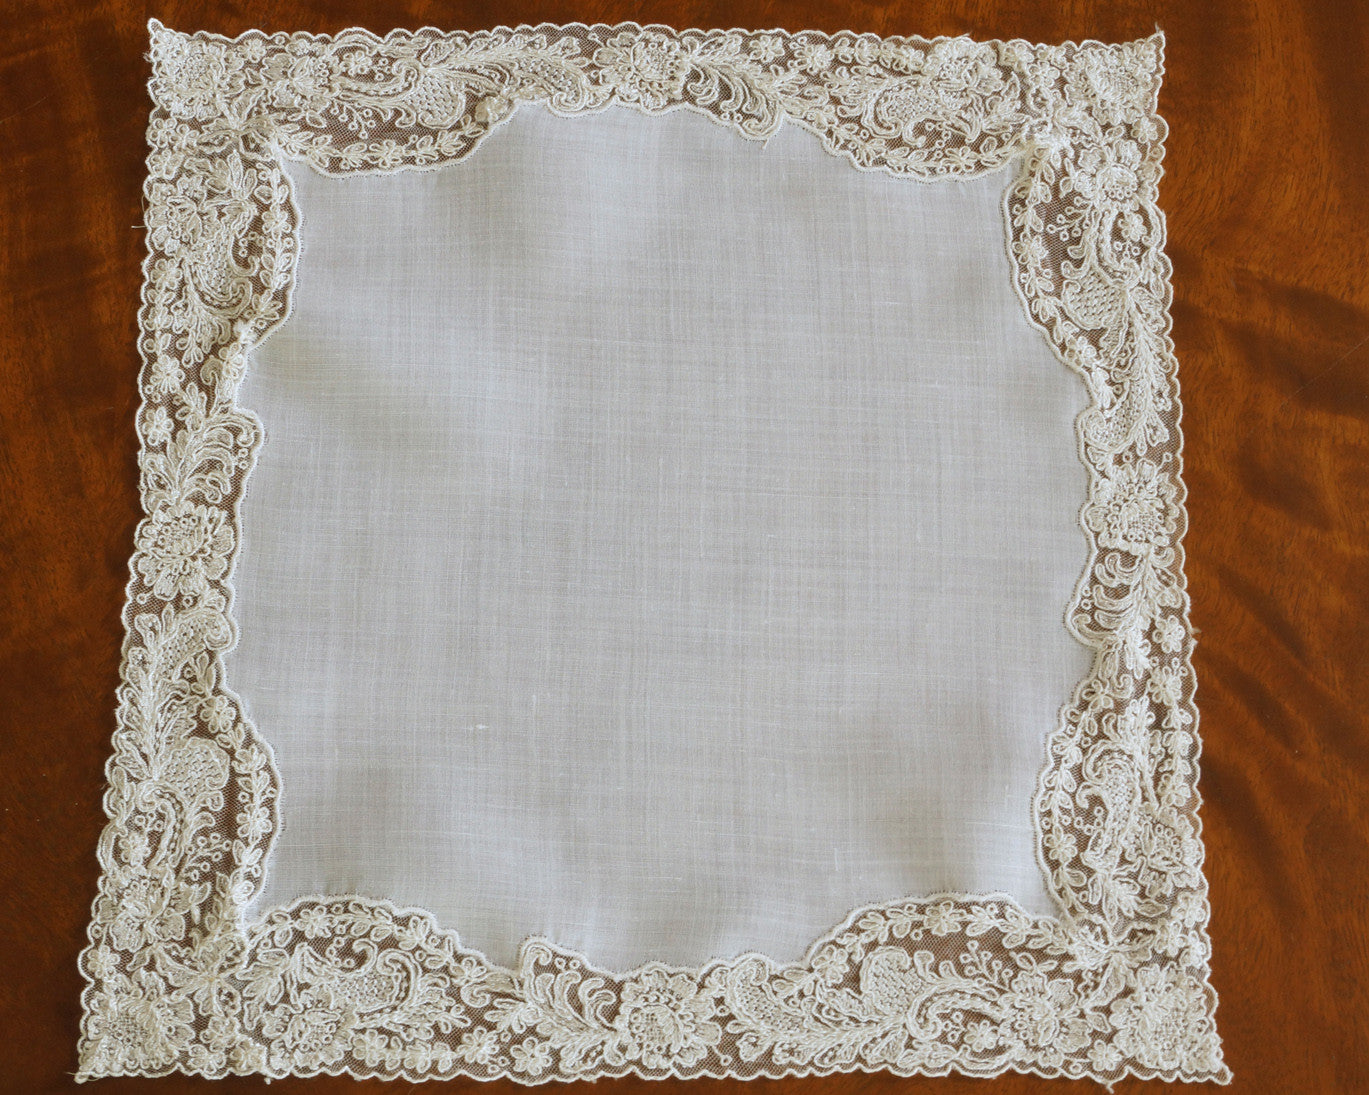 Lovely hankerchief in sheer white linen edged with exquisite lace in off white colour.